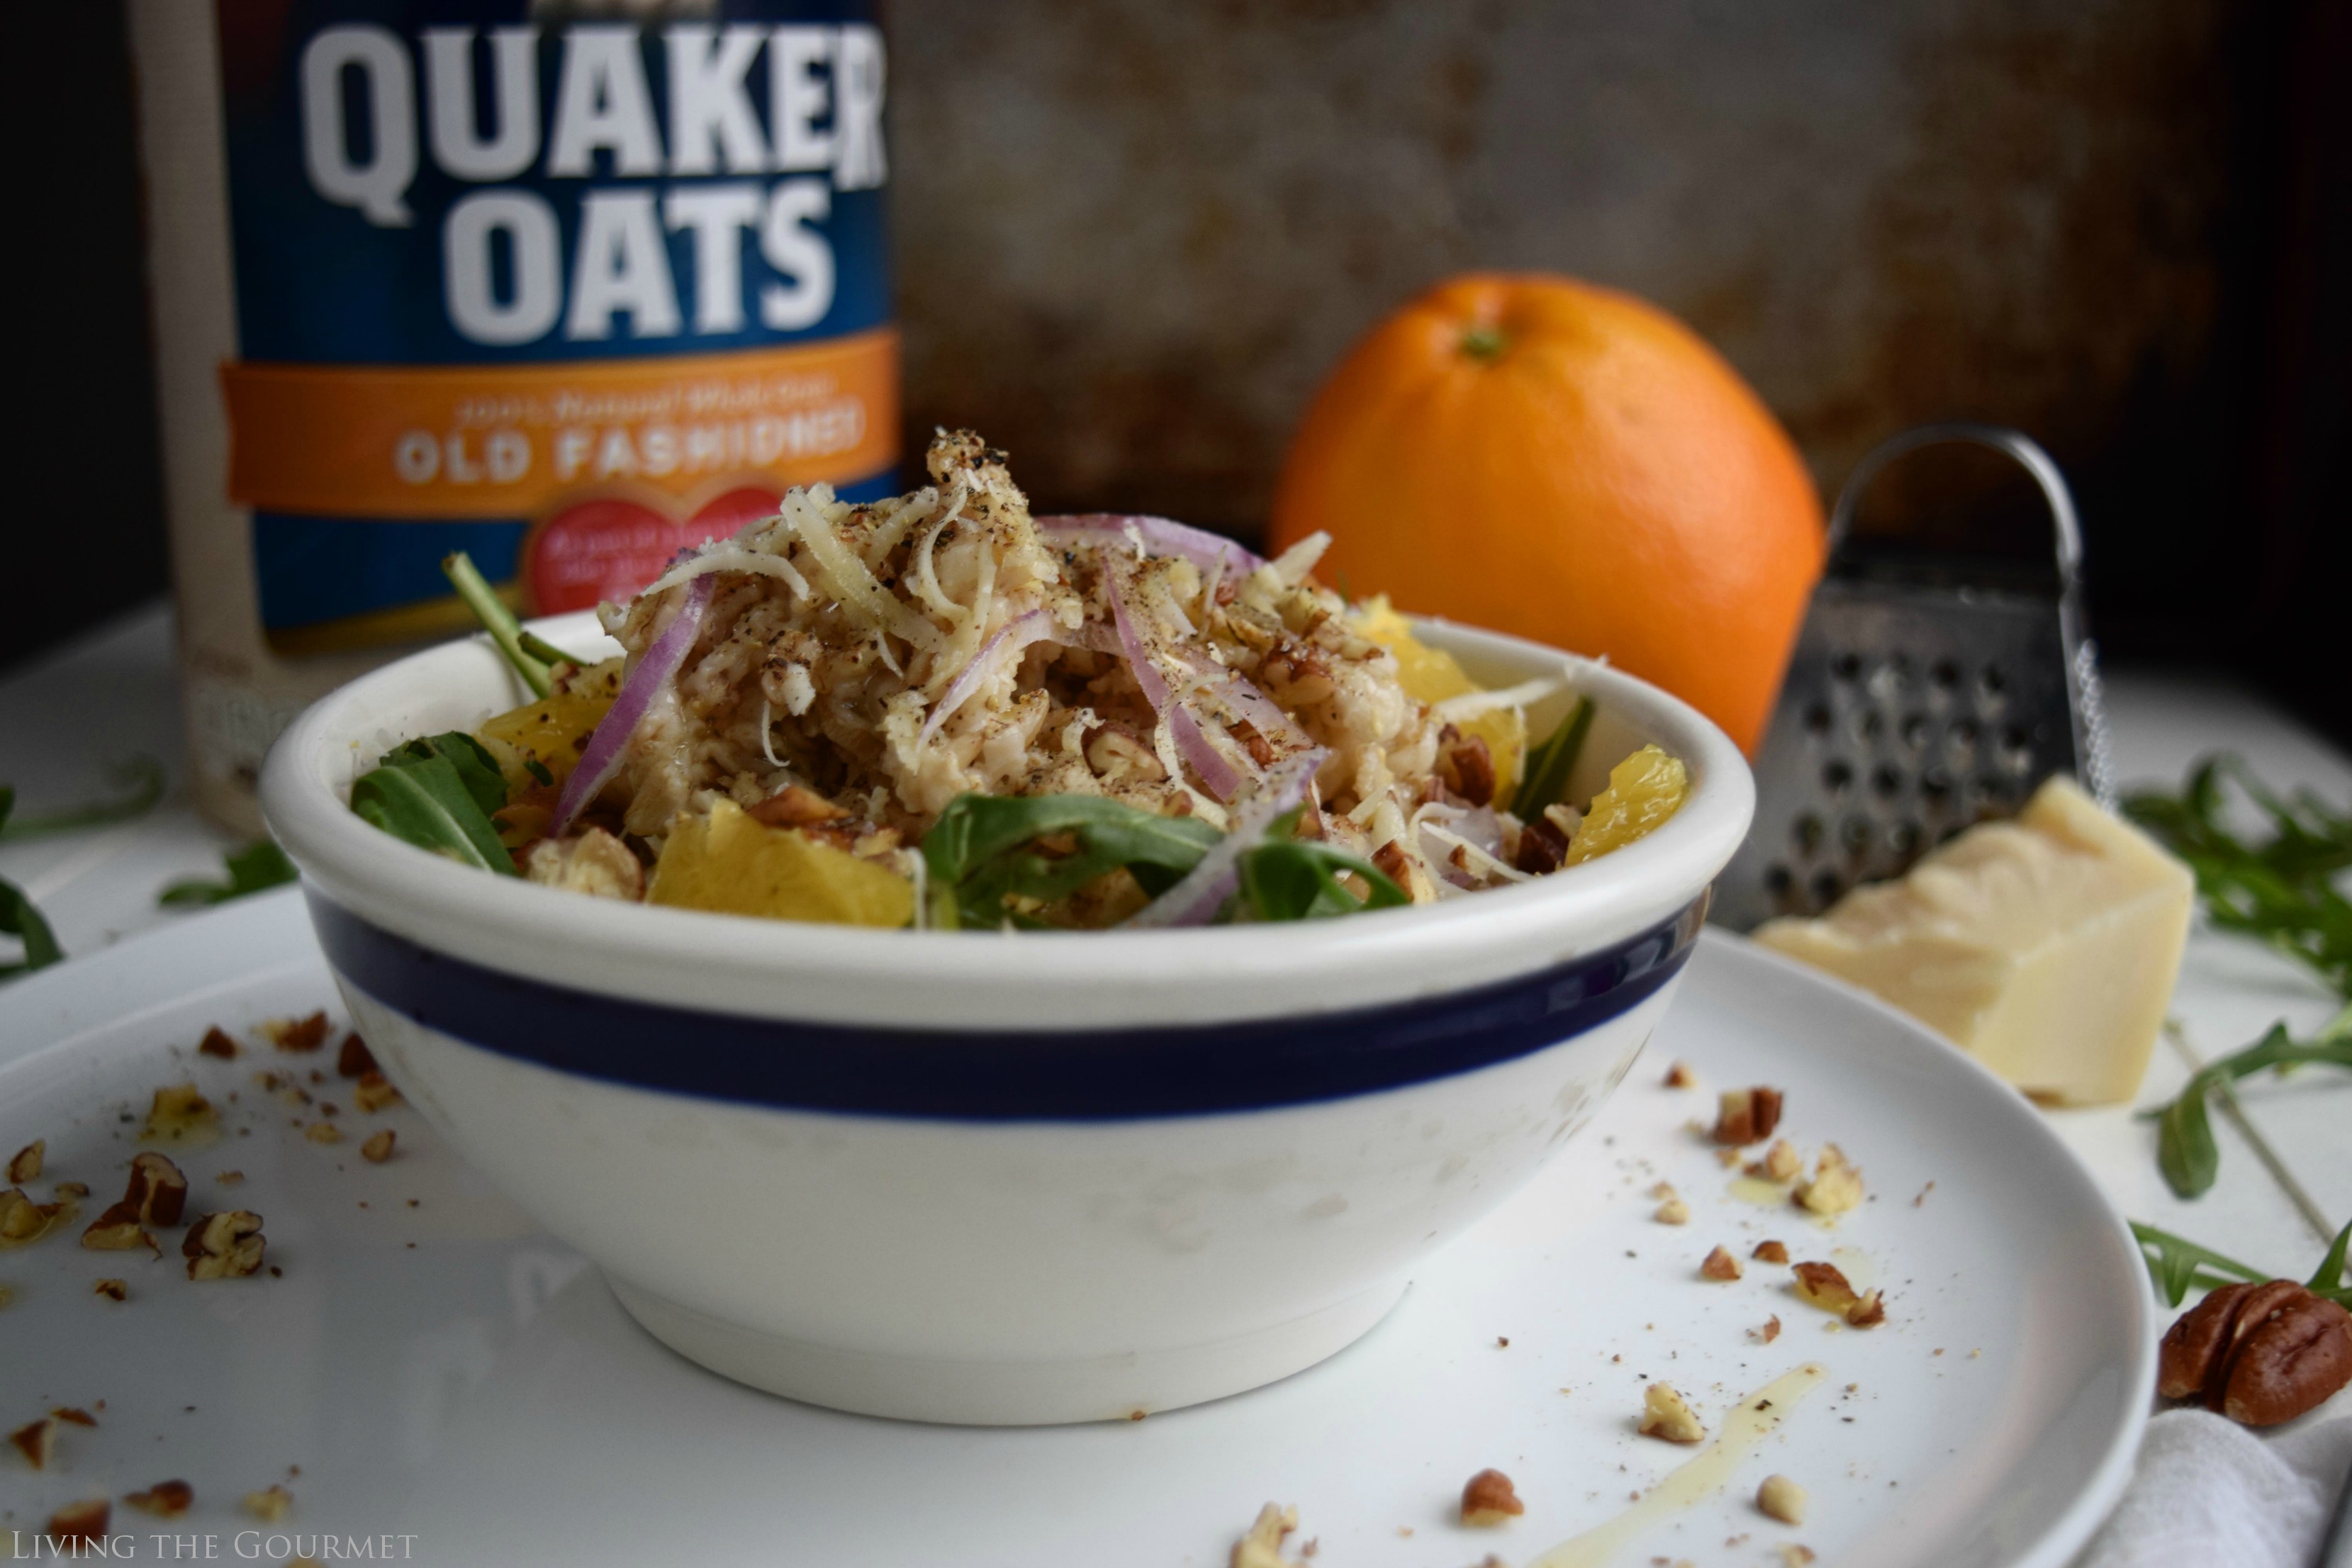 Living the Gourmet: Savory Oatmeal with Salad Greens | #BringYourBestBowl #Walmart